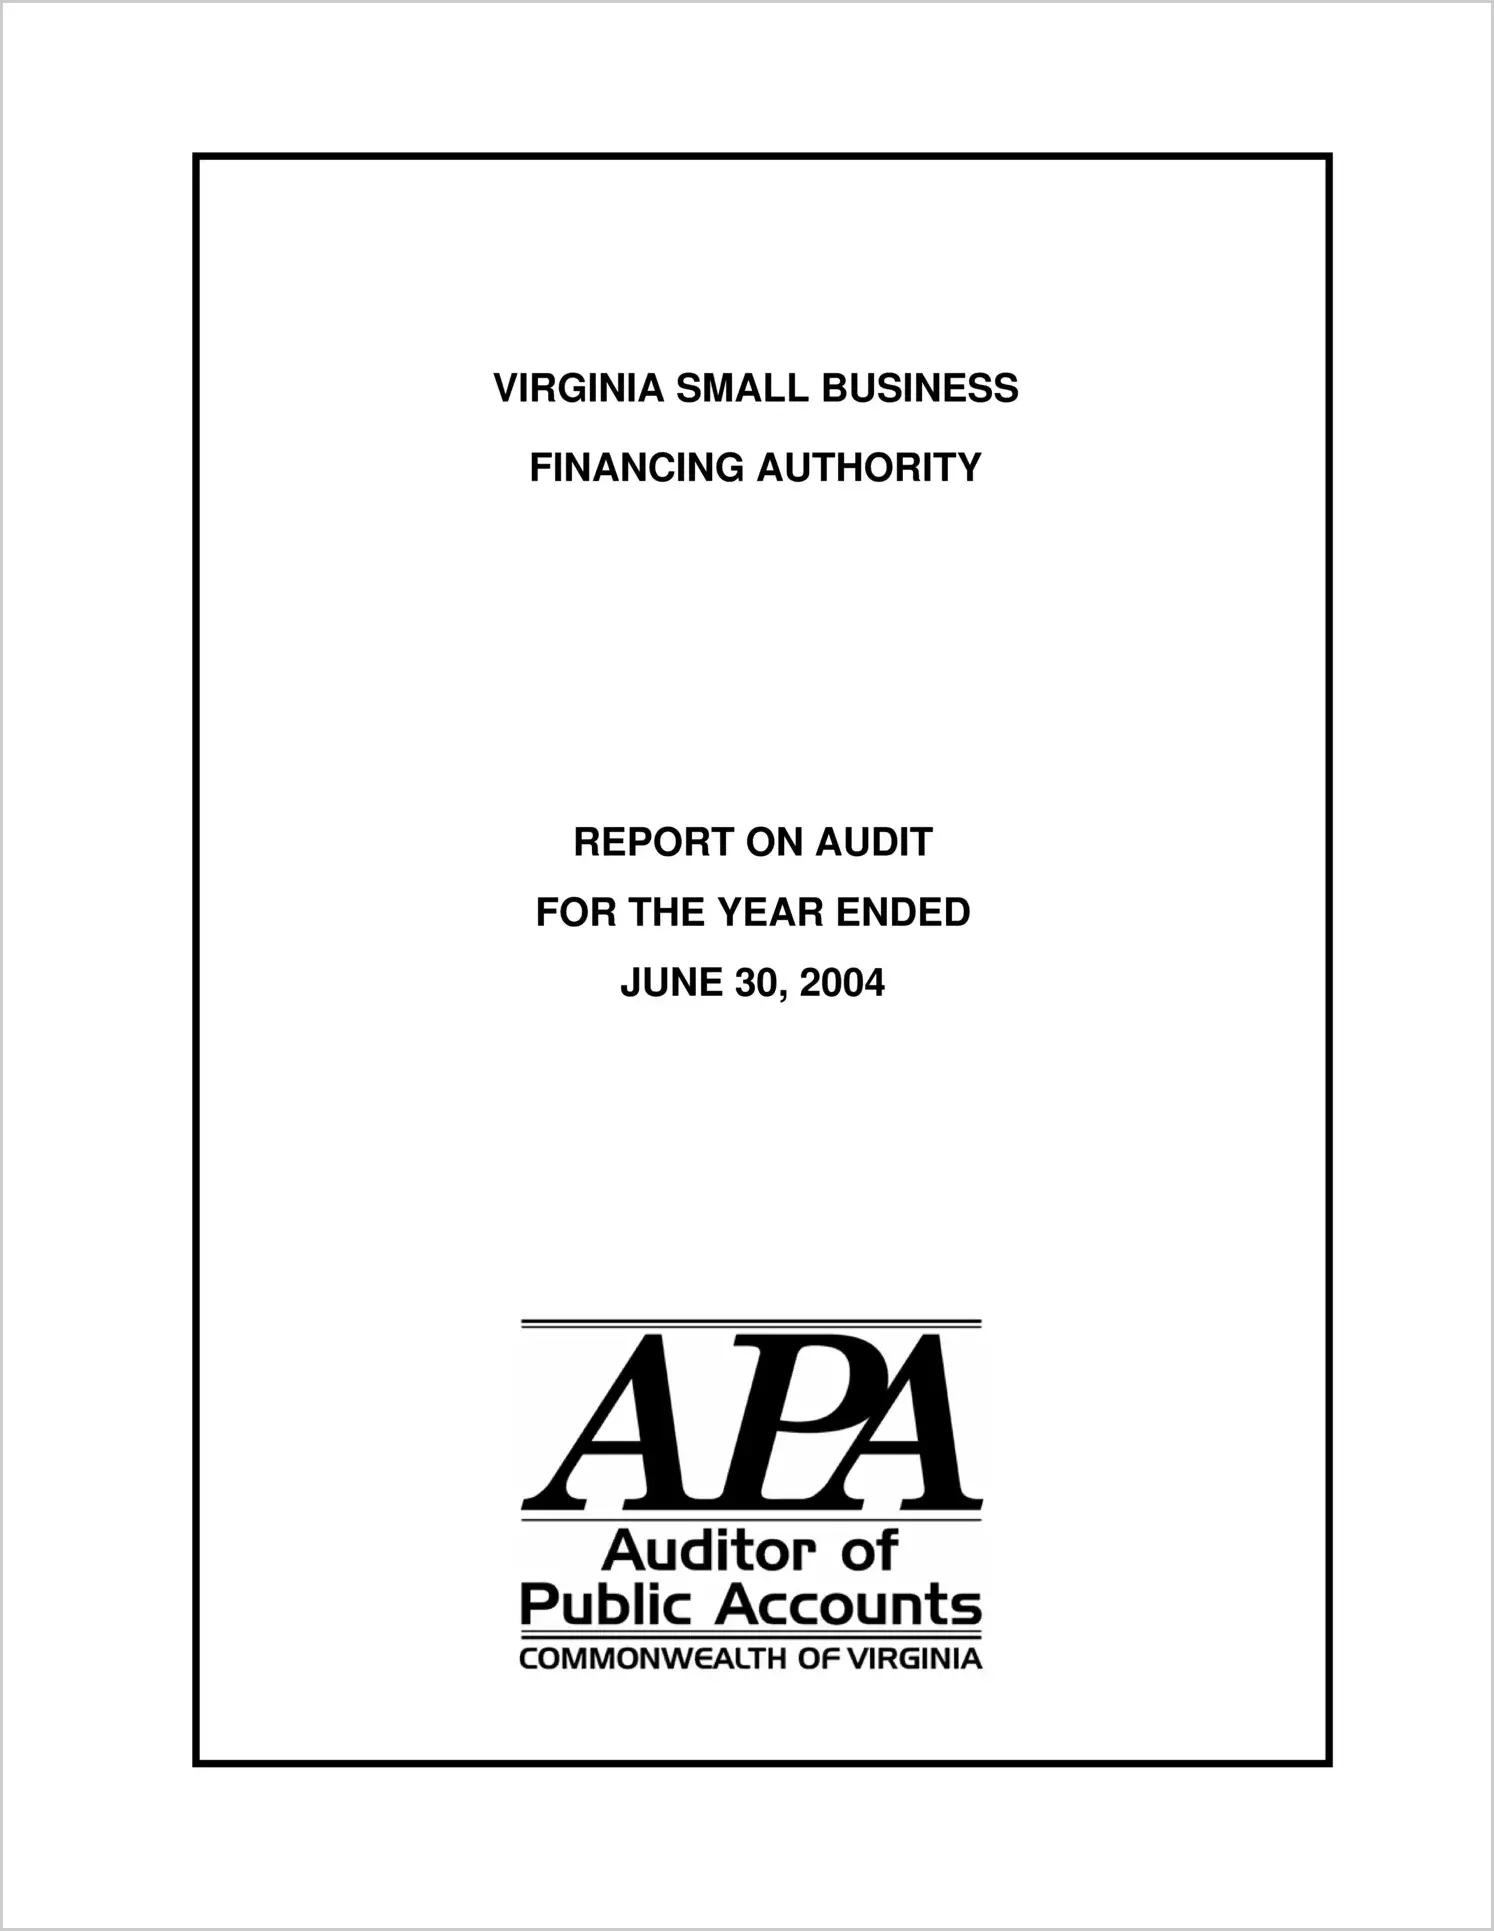 Virginia Small Business Financing Authority for the year ended June 30, 2004